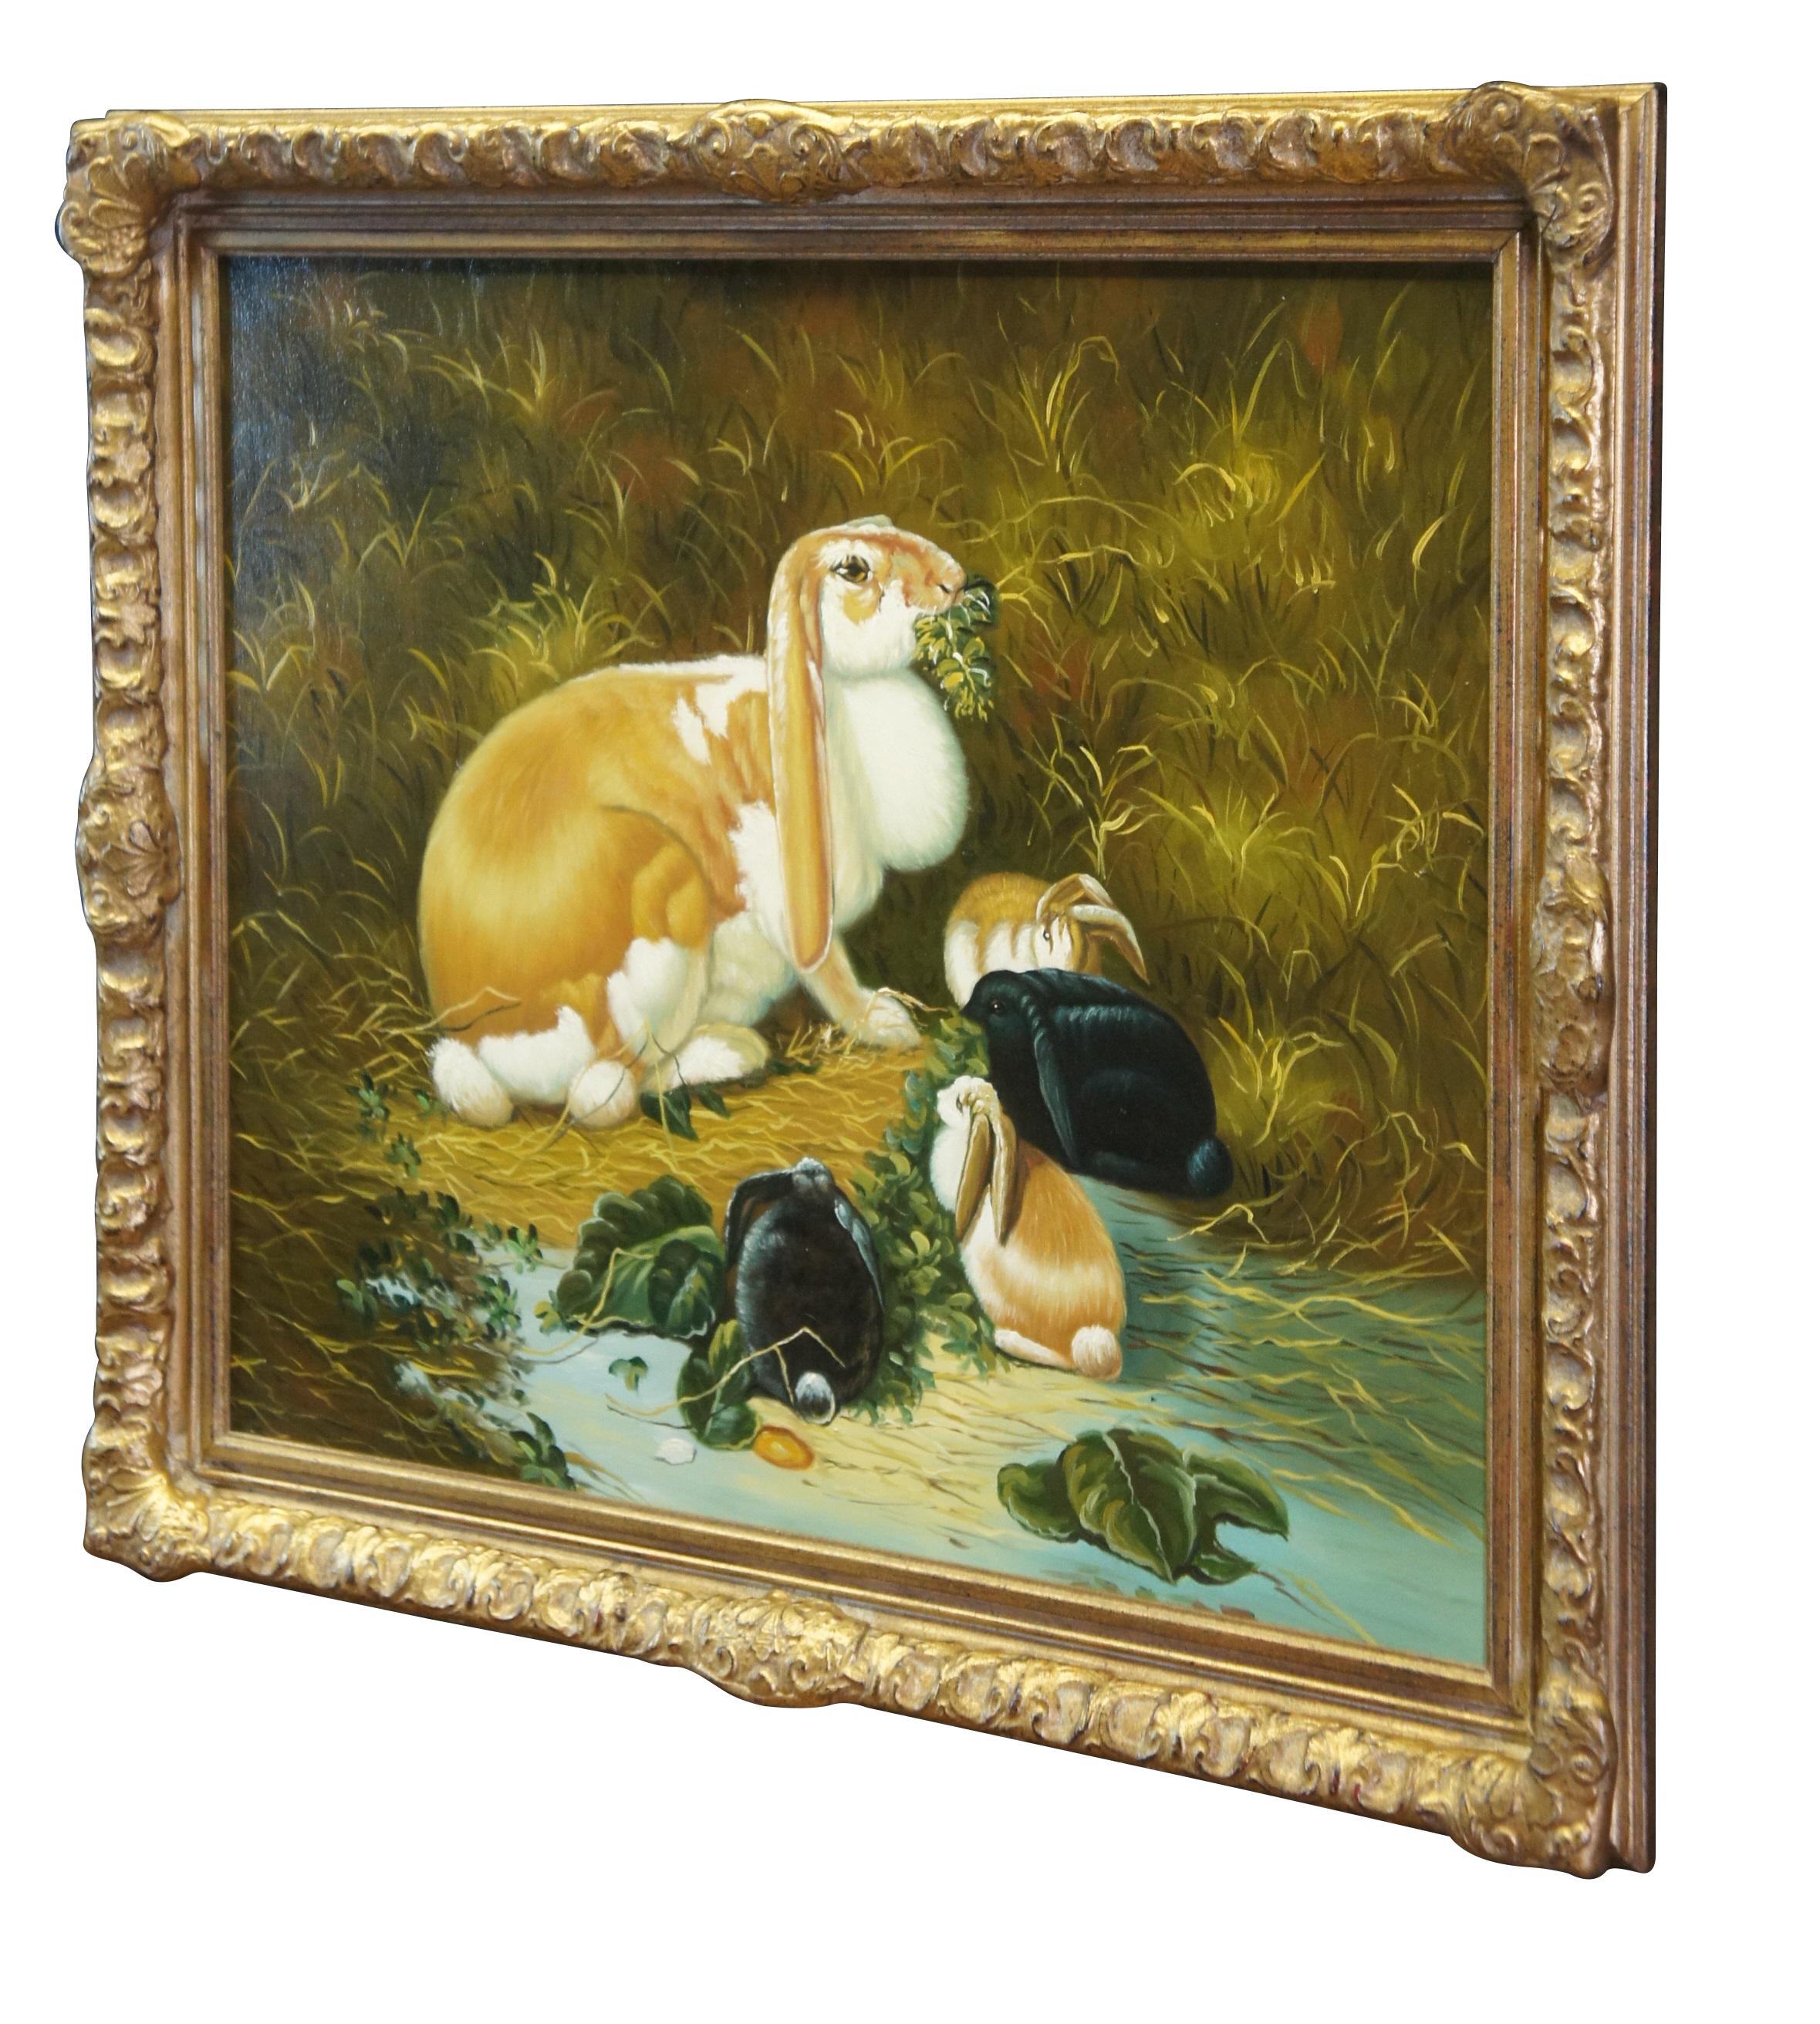 Chelsea House Lop Eared Doe Rabbit Oil Painting After John Frederick Herring Sr In Good Condition For Sale In Dayton, OH